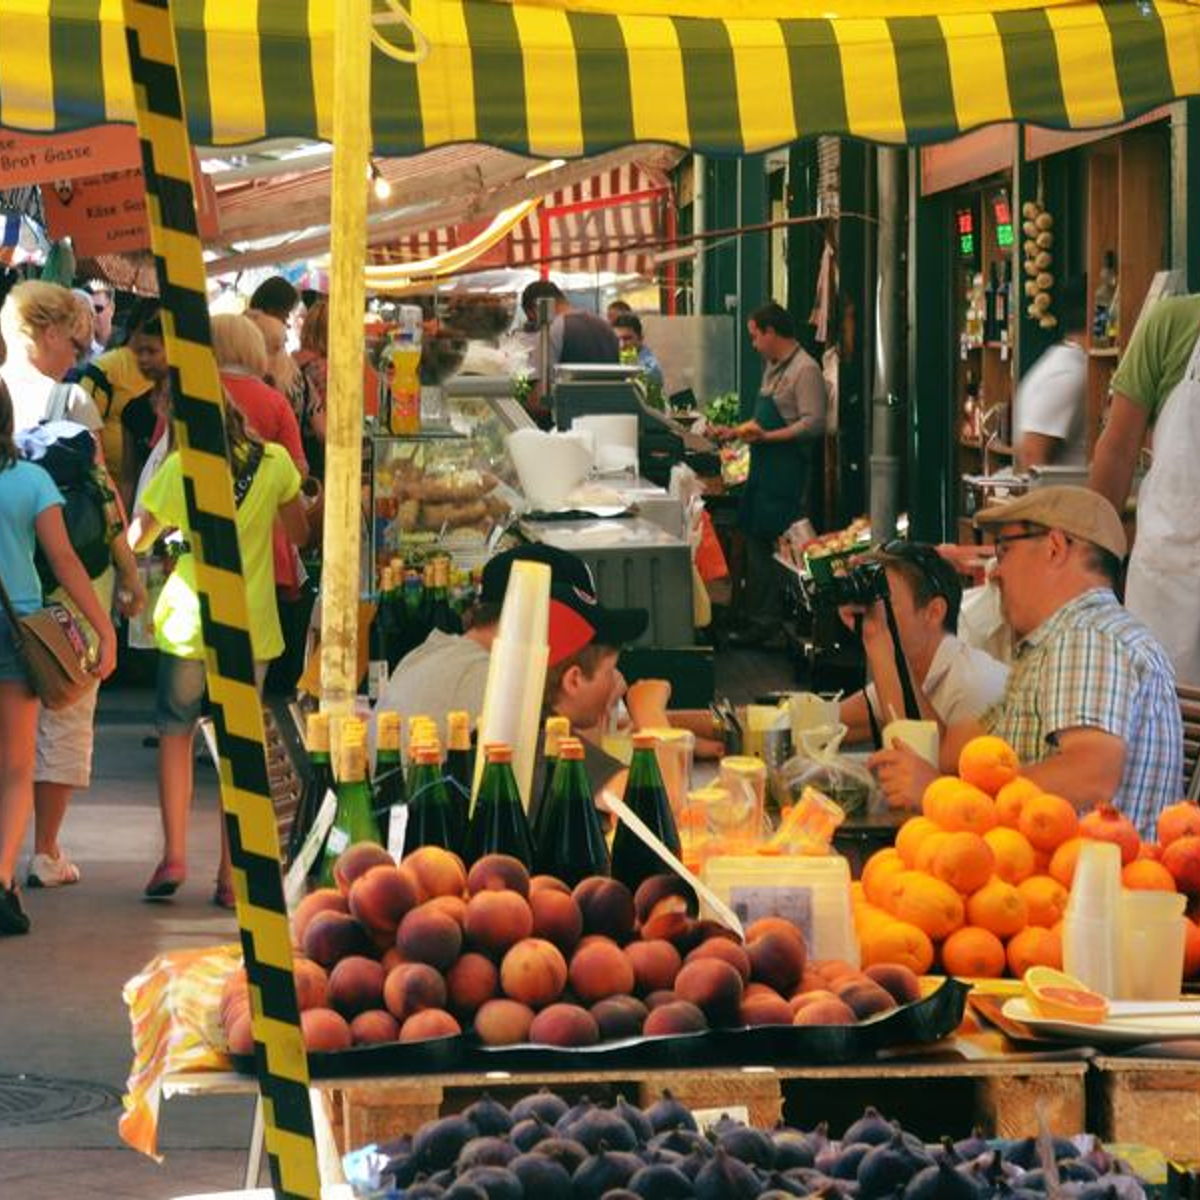 FOOD TOUR - Learn the Secrets of the Viennese Naschmarkt